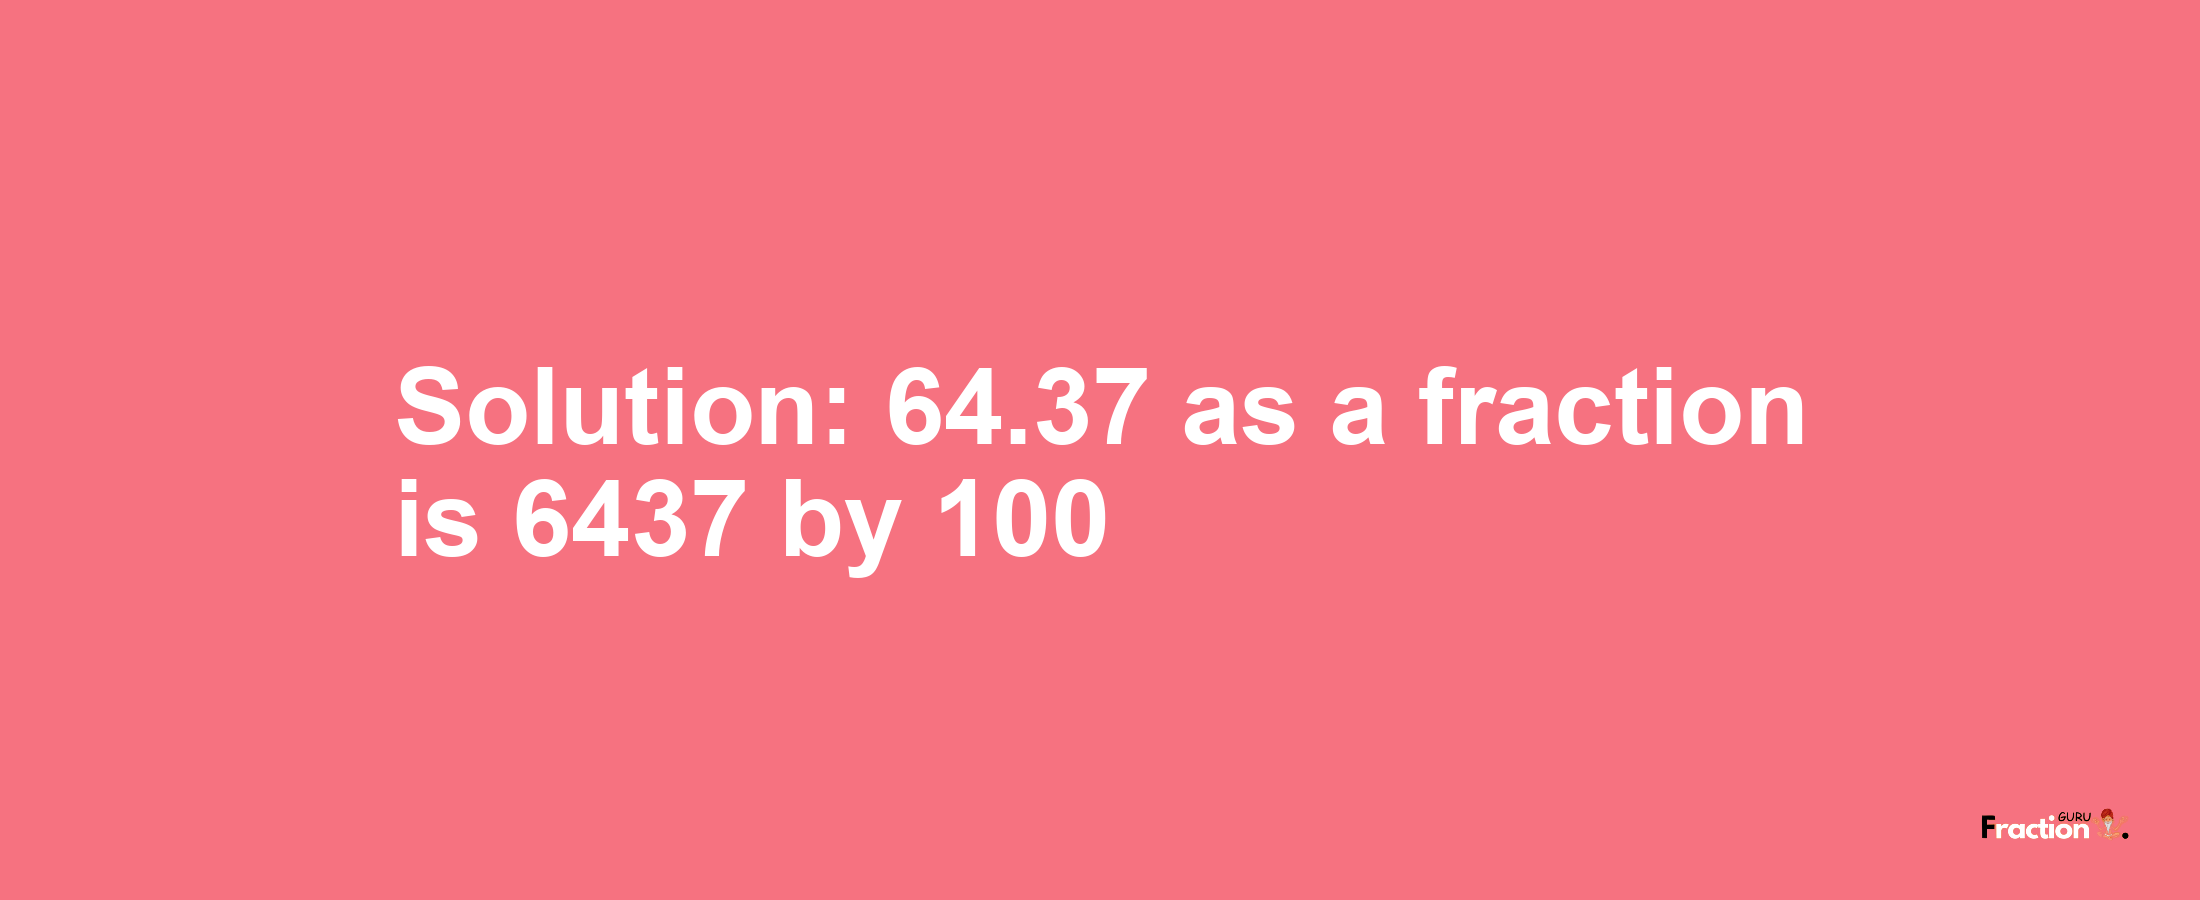 Solution:64.37 as a fraction is 6437/100